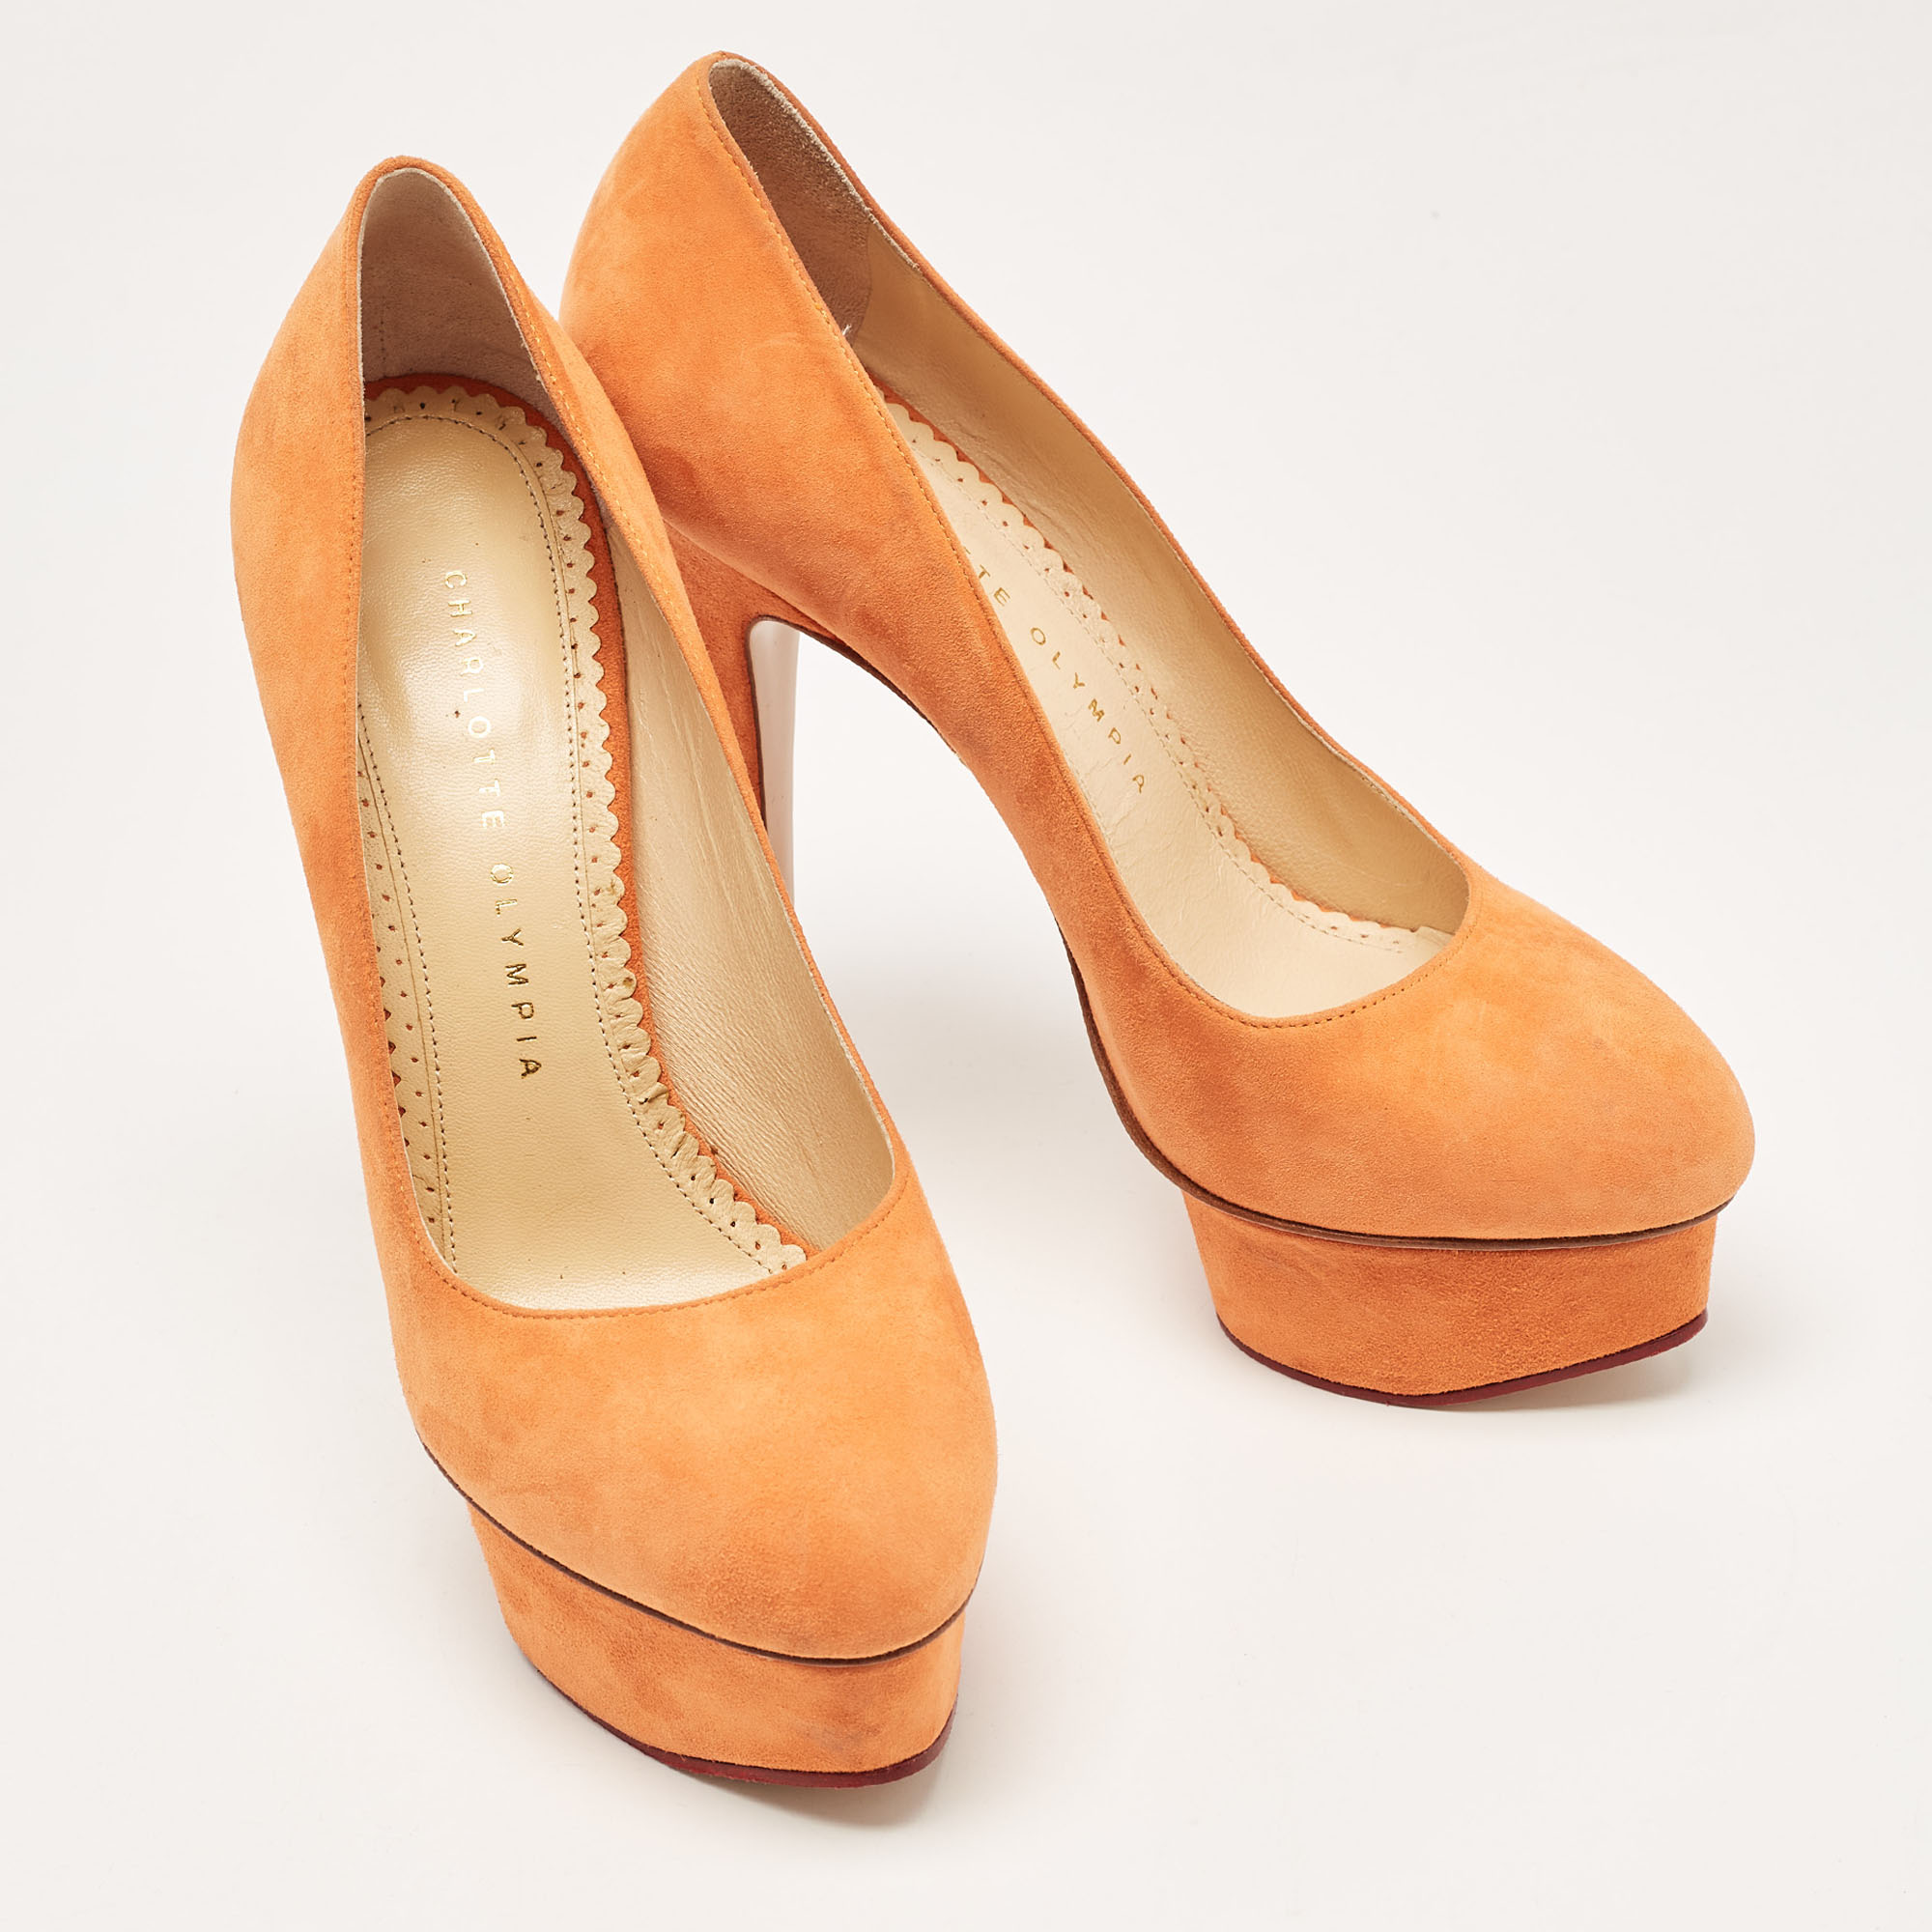 Charlotte Olympia Orange Suede Dolly Pumps Size 37